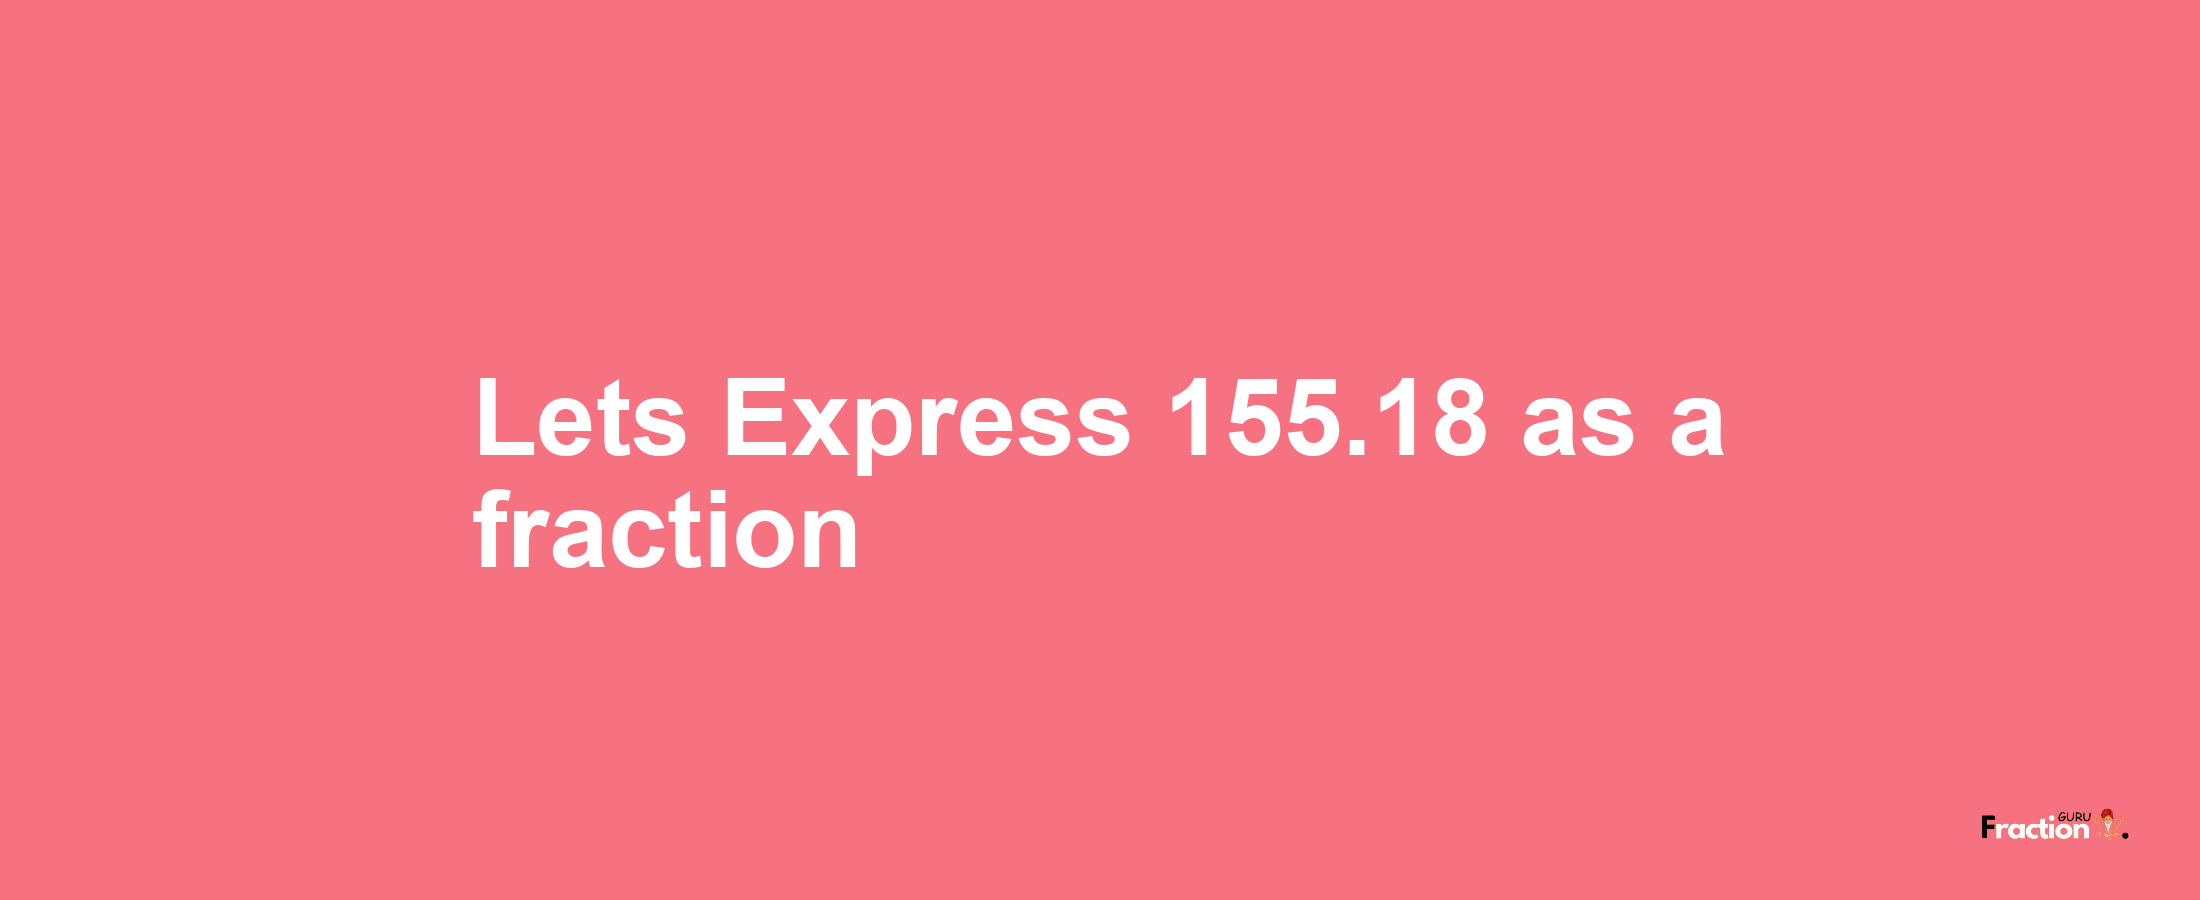 Lets Express 155.18 as afraction